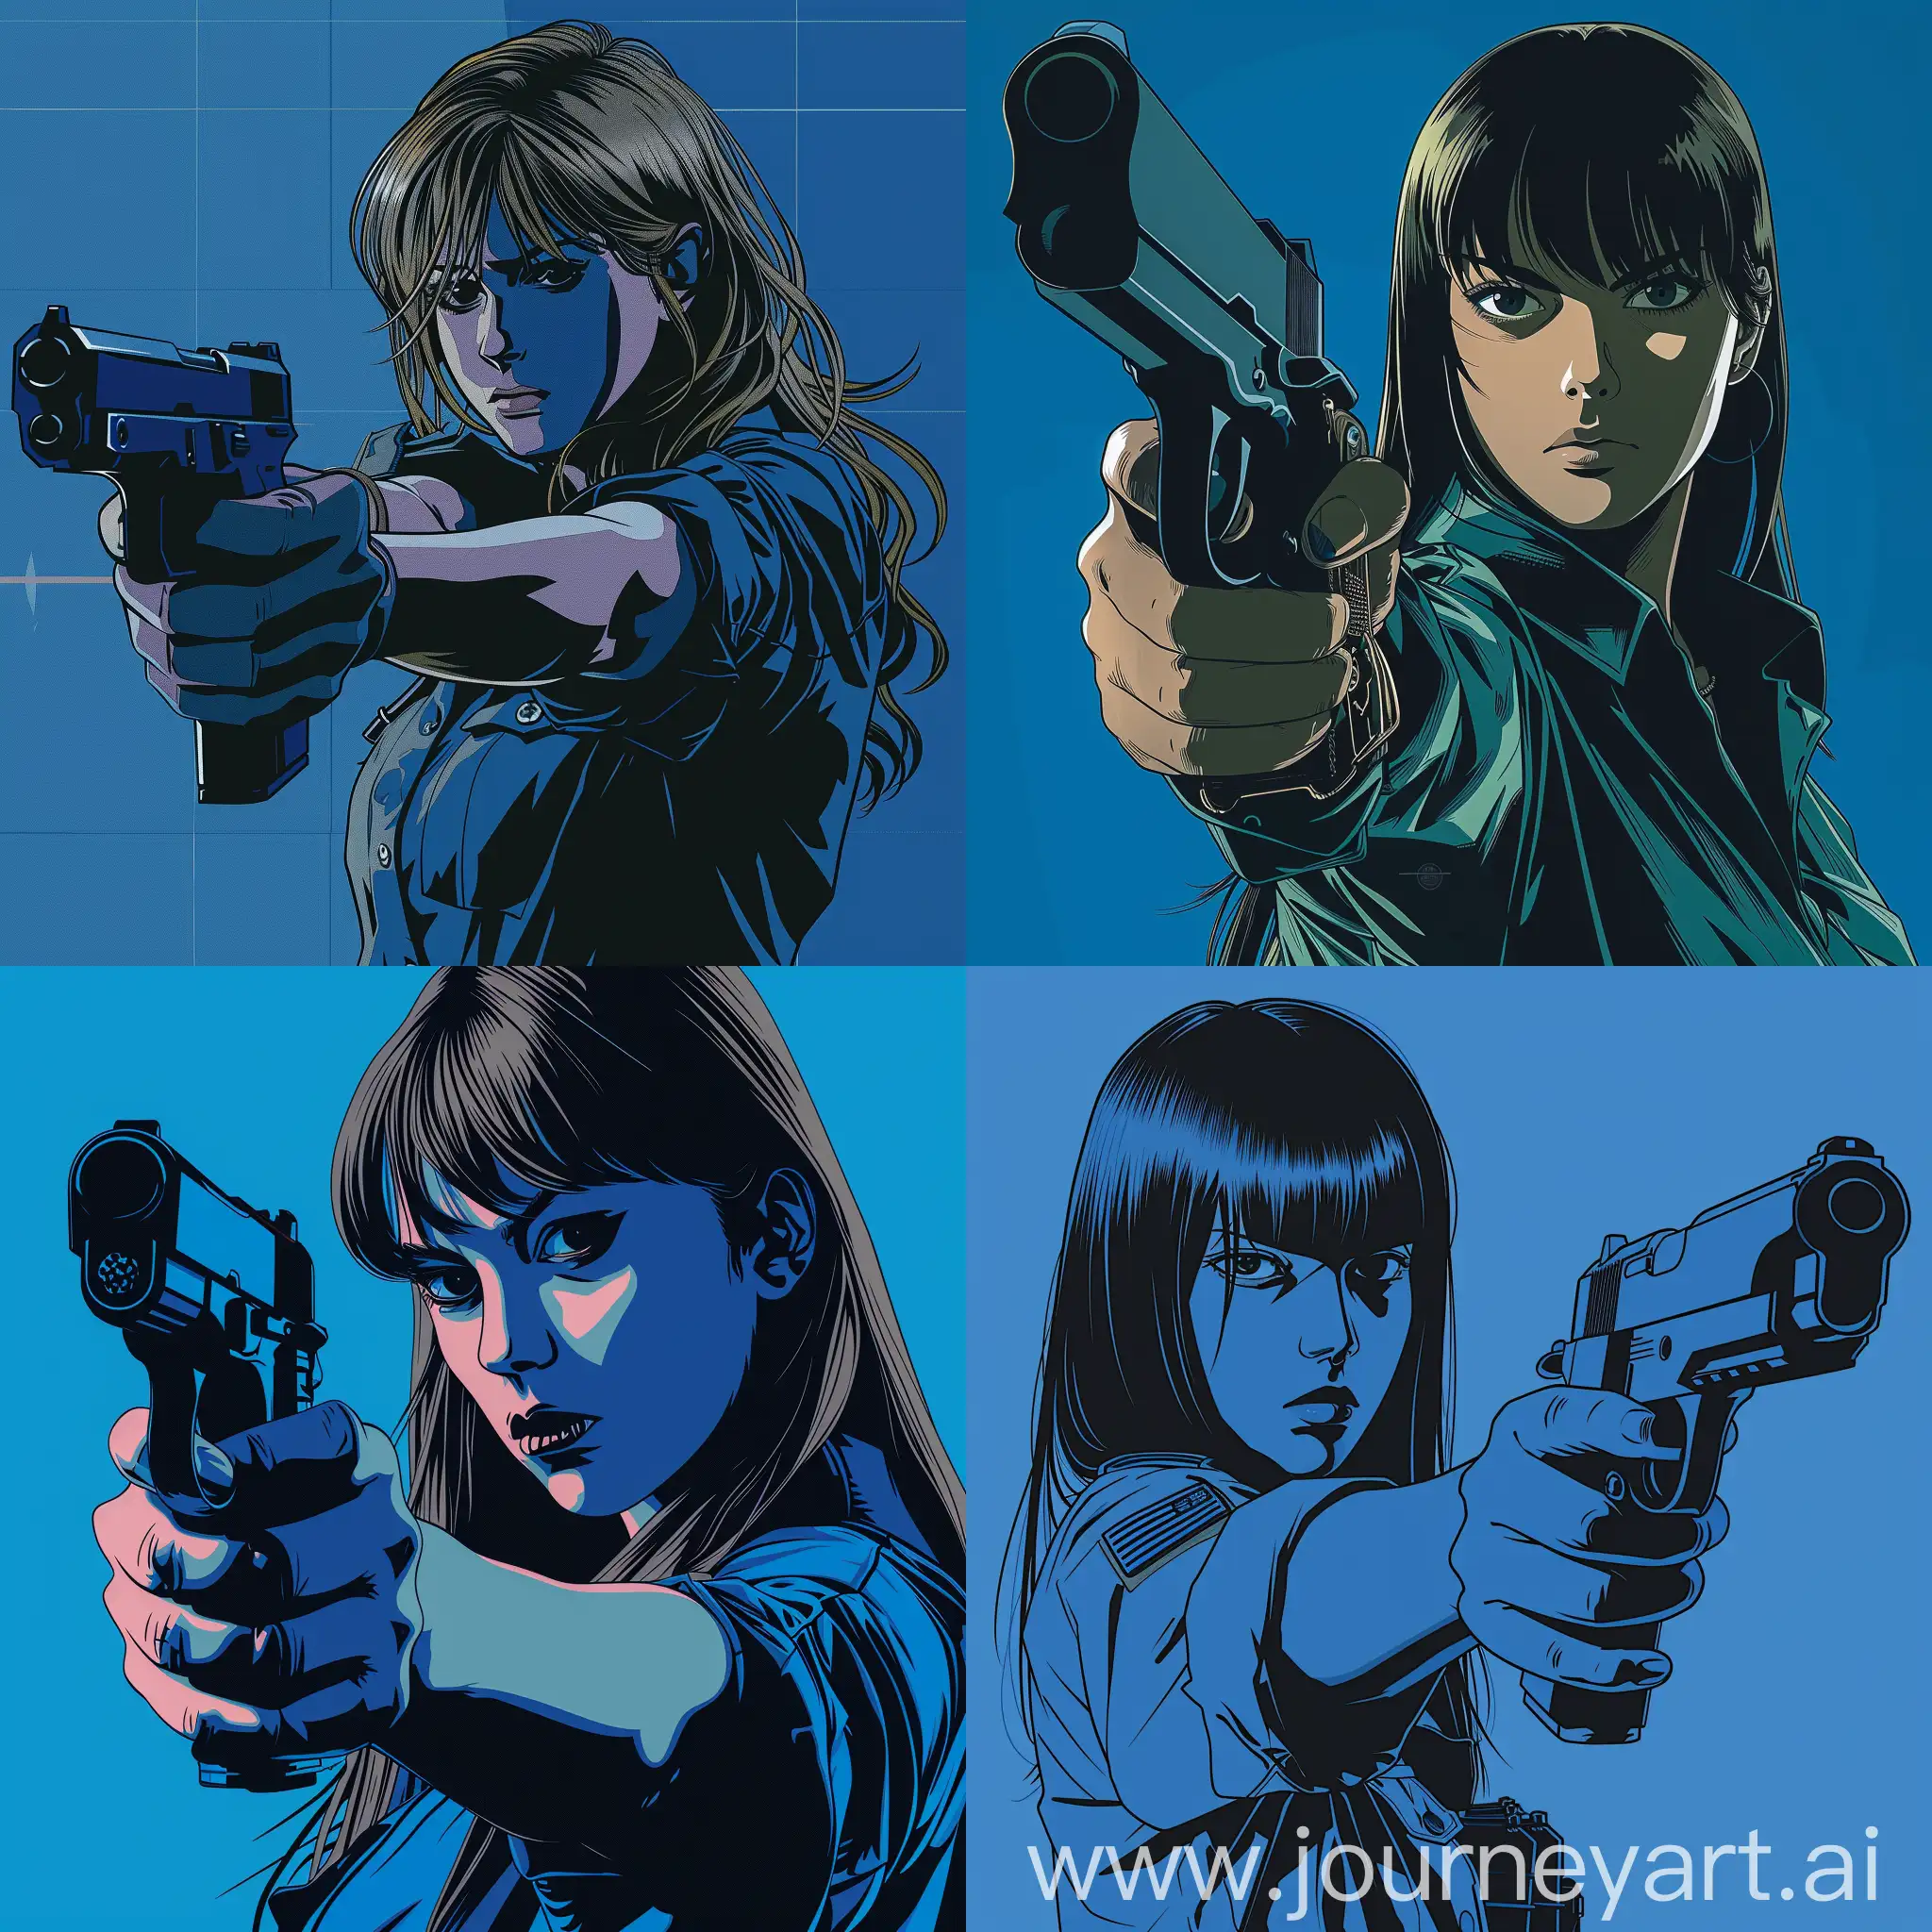 Anime woman holding a gun in front of a blue background, in the style of noir comic art, graphic illustration, militaristic realism, modular, heavy lines, cobra, zone system